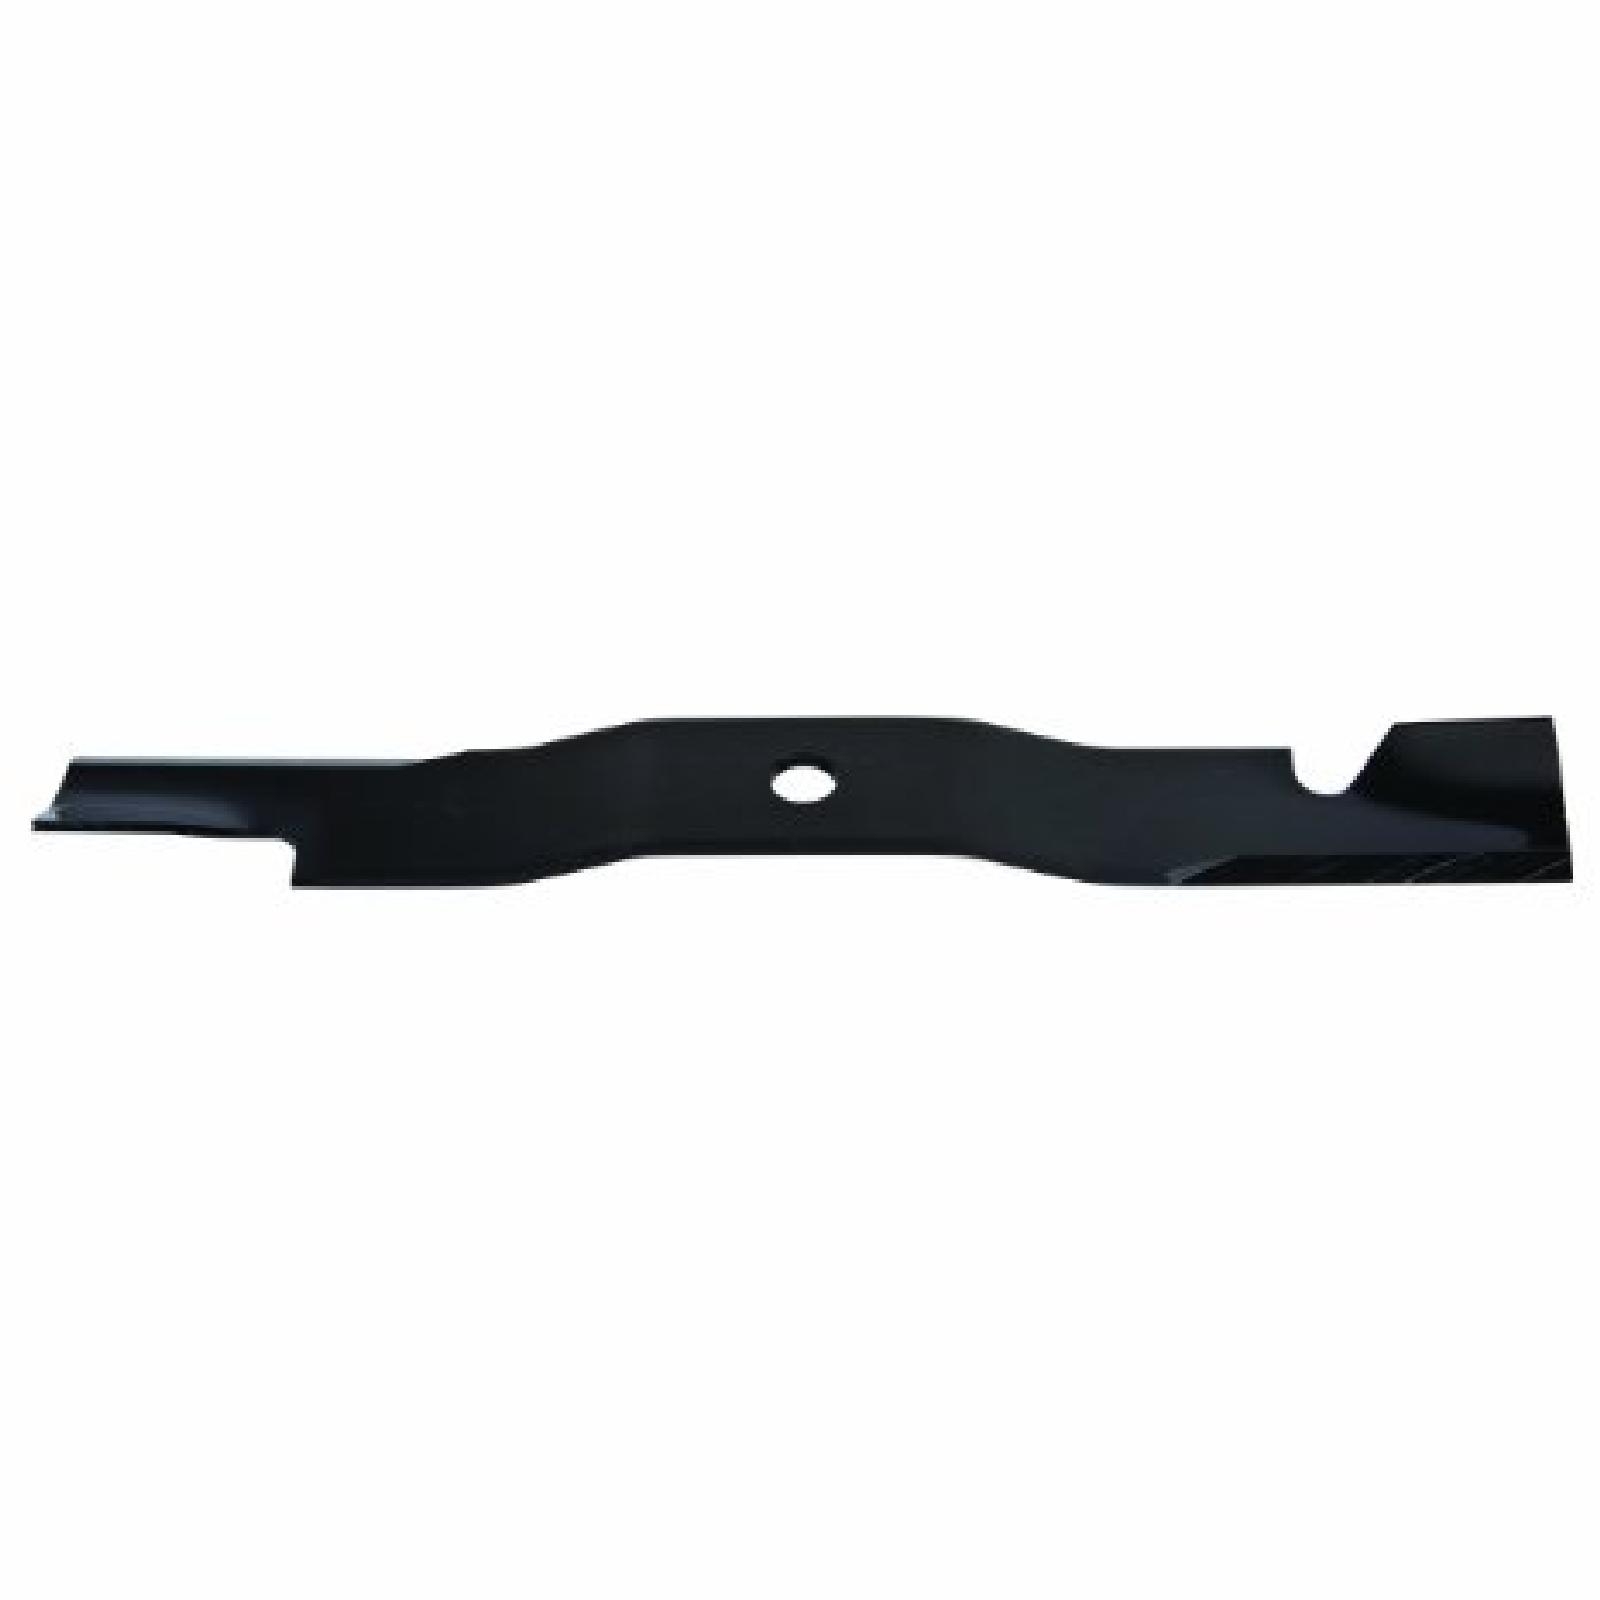 BLADE, EXMARK, FUSION, 20 part# 492-730 by Oregon - Click Image to Close